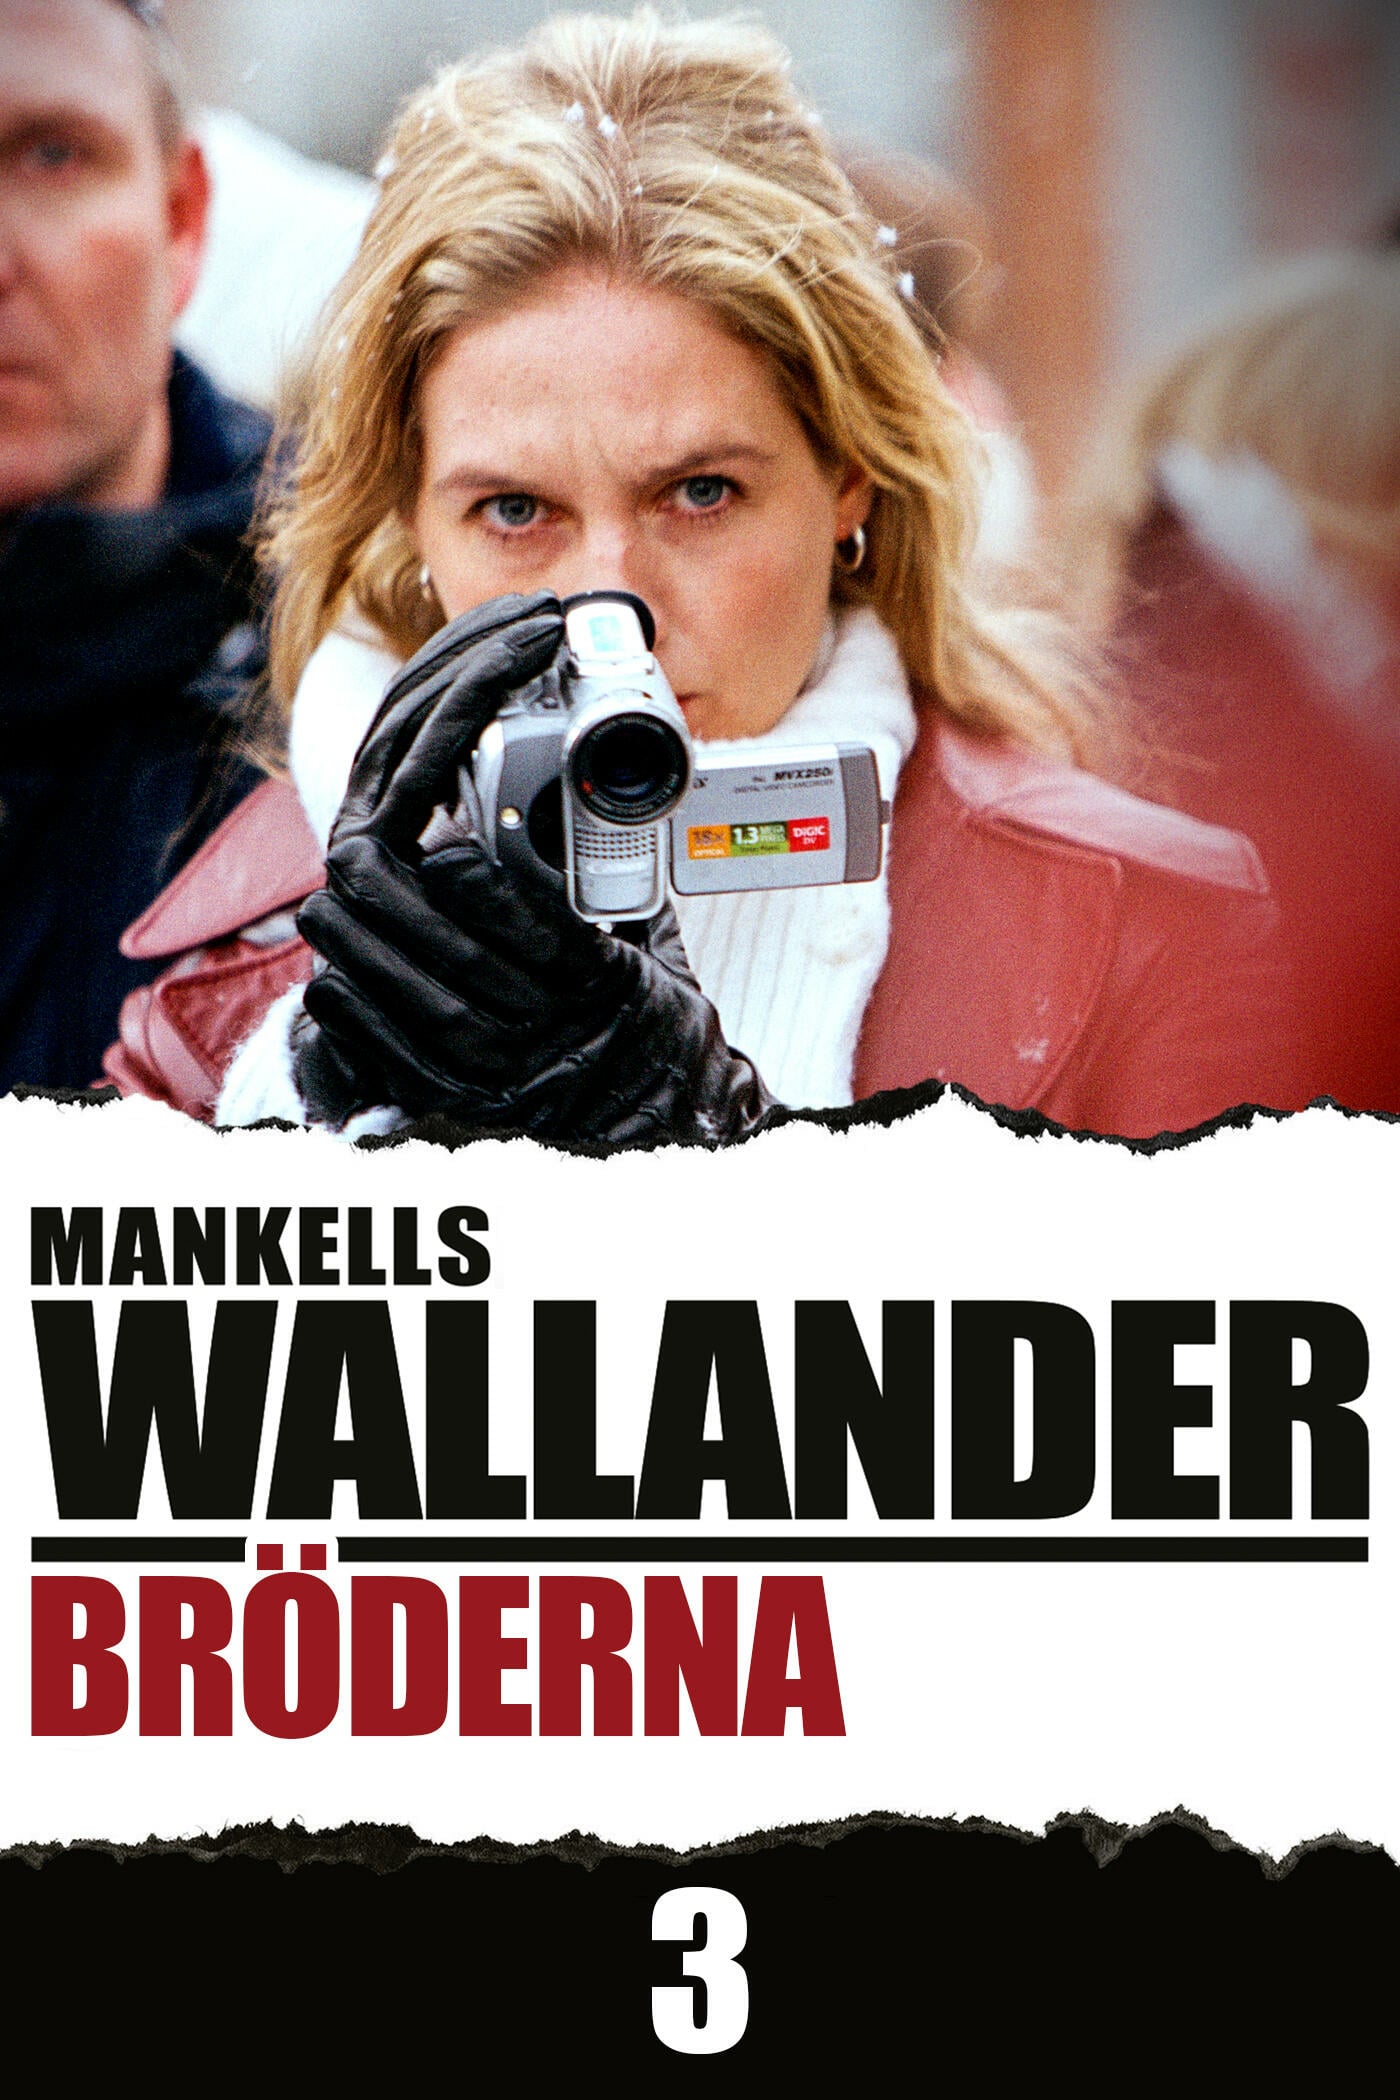 Wallander 03 - The Brothers